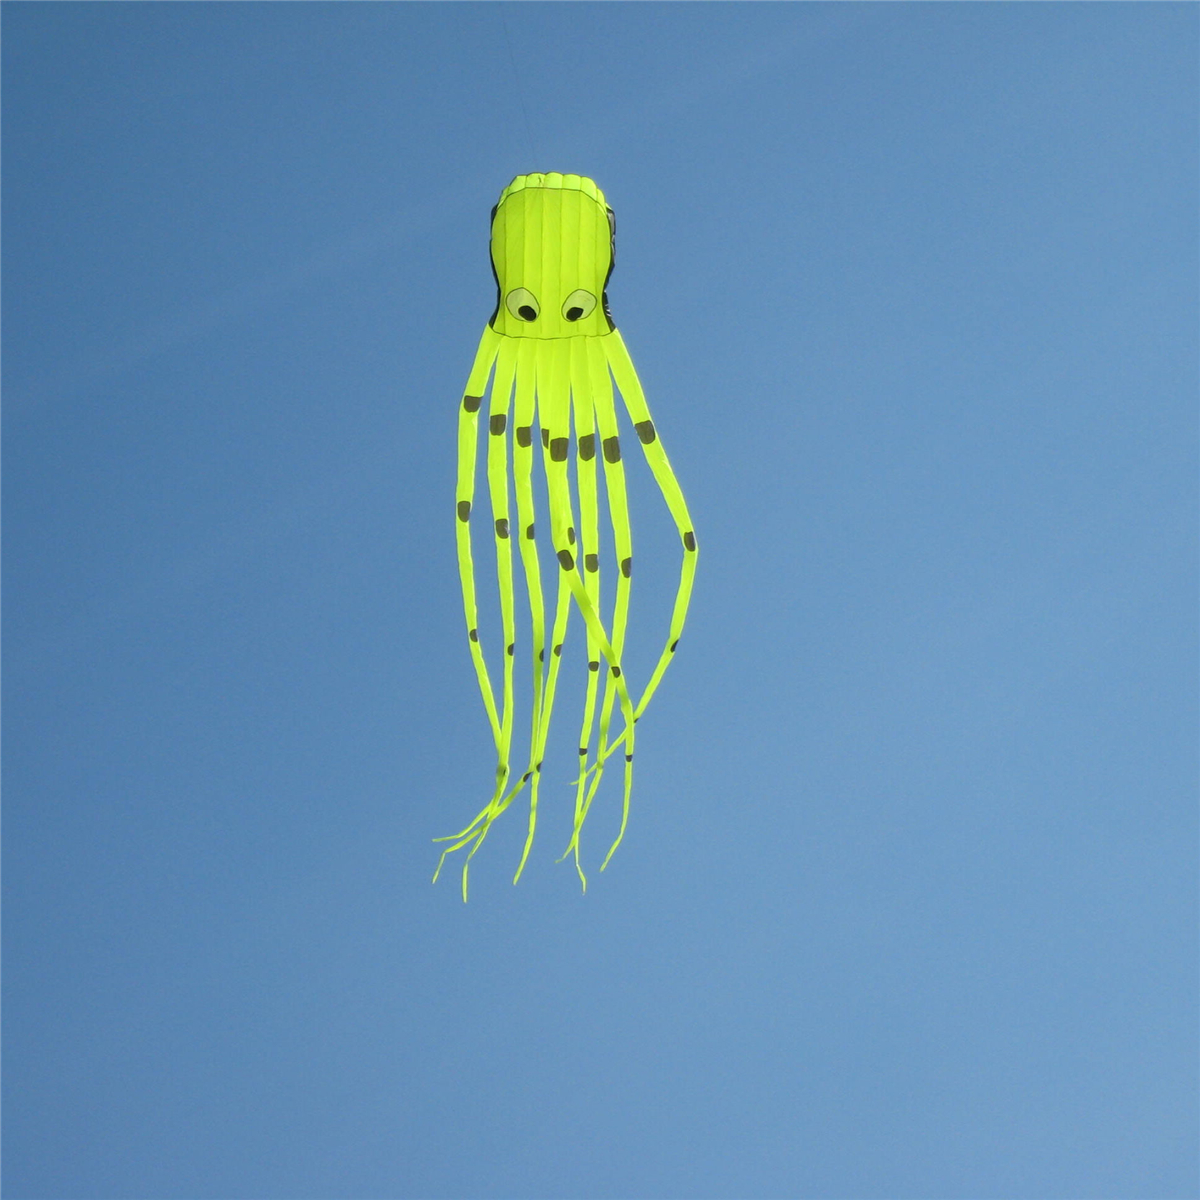 35Inches-Octopus-Kite-Outdoor-Sports-Toys-For-Kids-Single-Line-Parachute-Toys-1378526